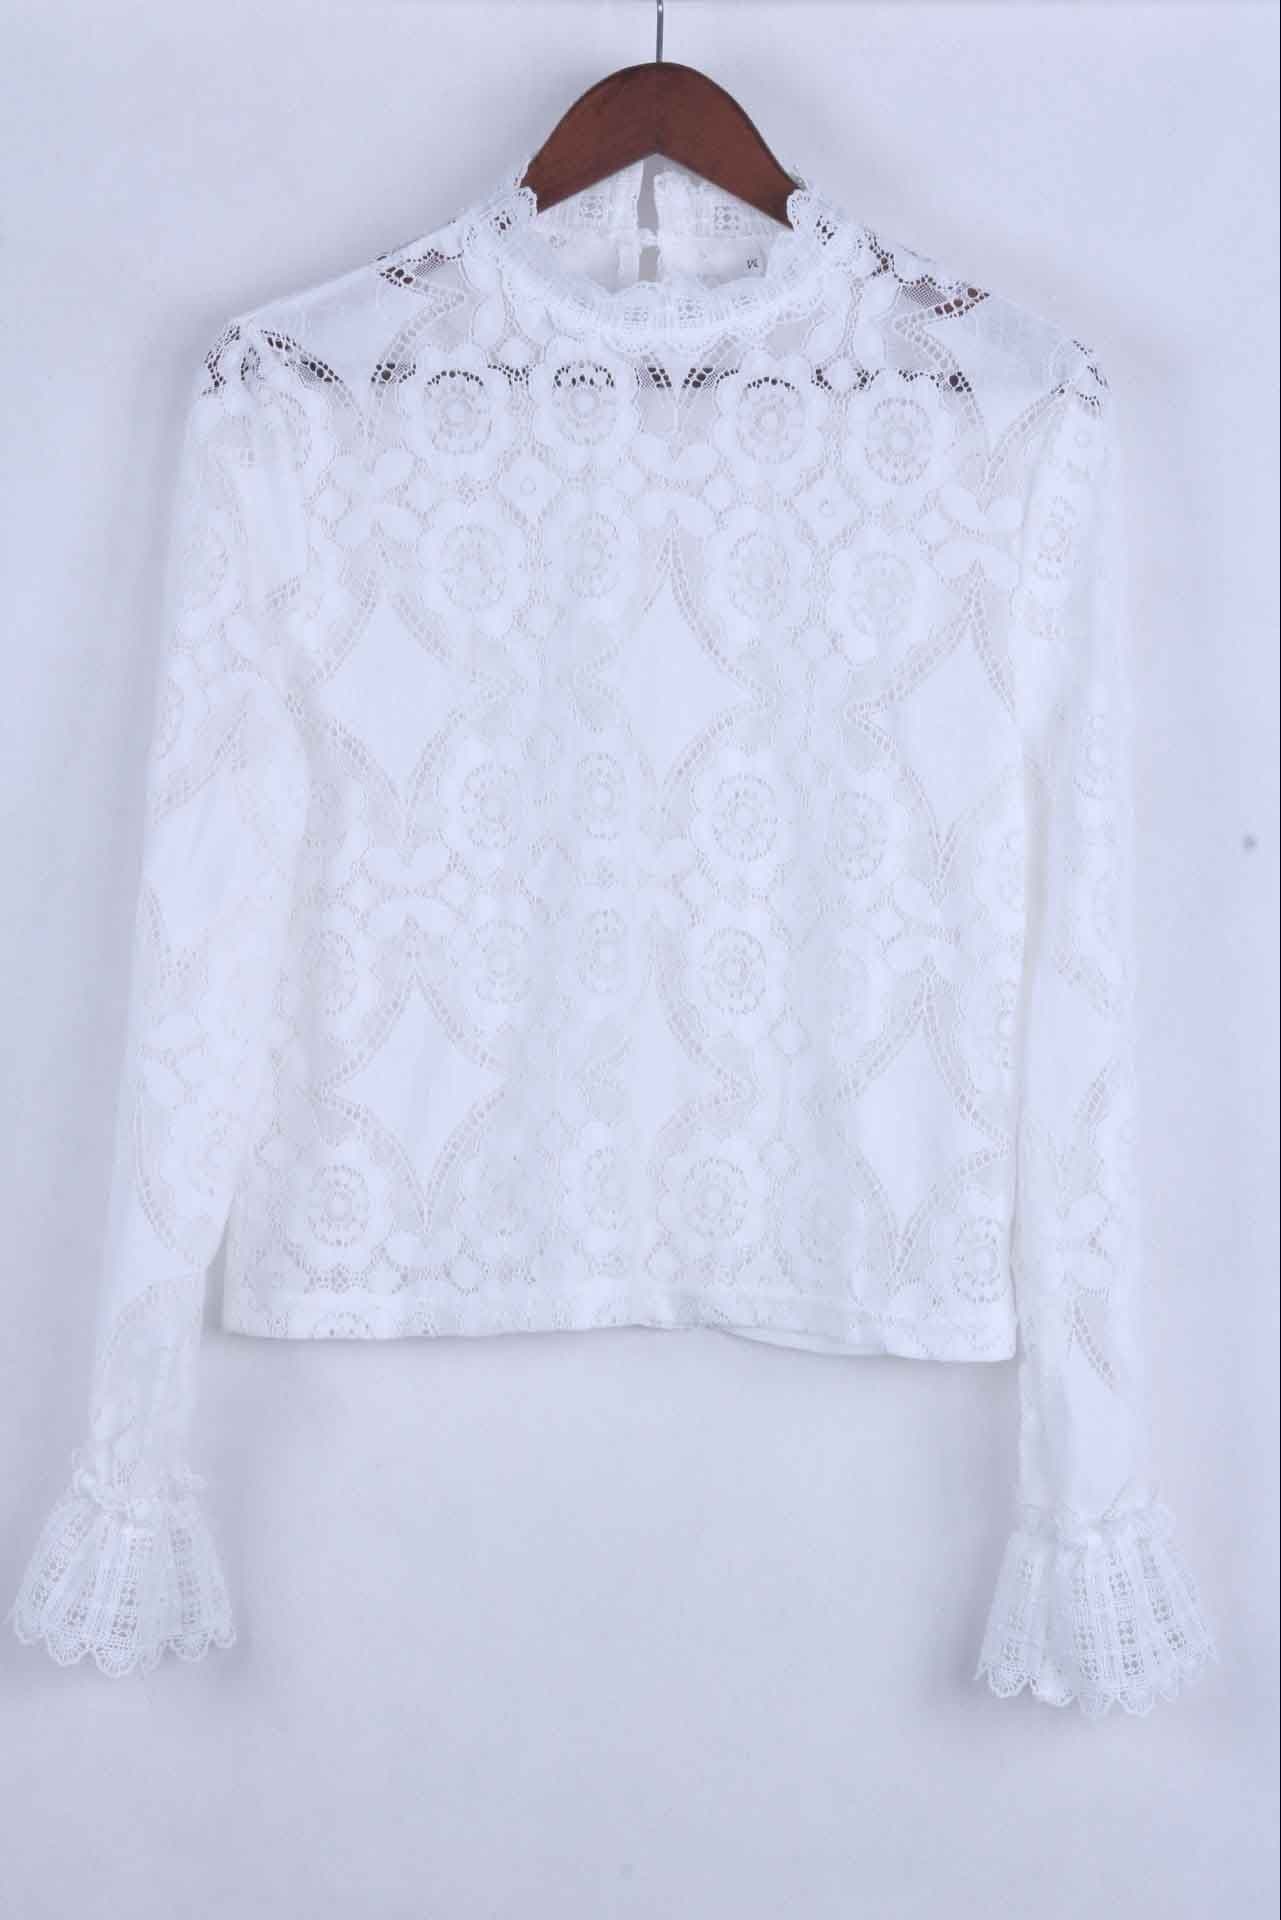 Vorioal Sexy Lace Tops